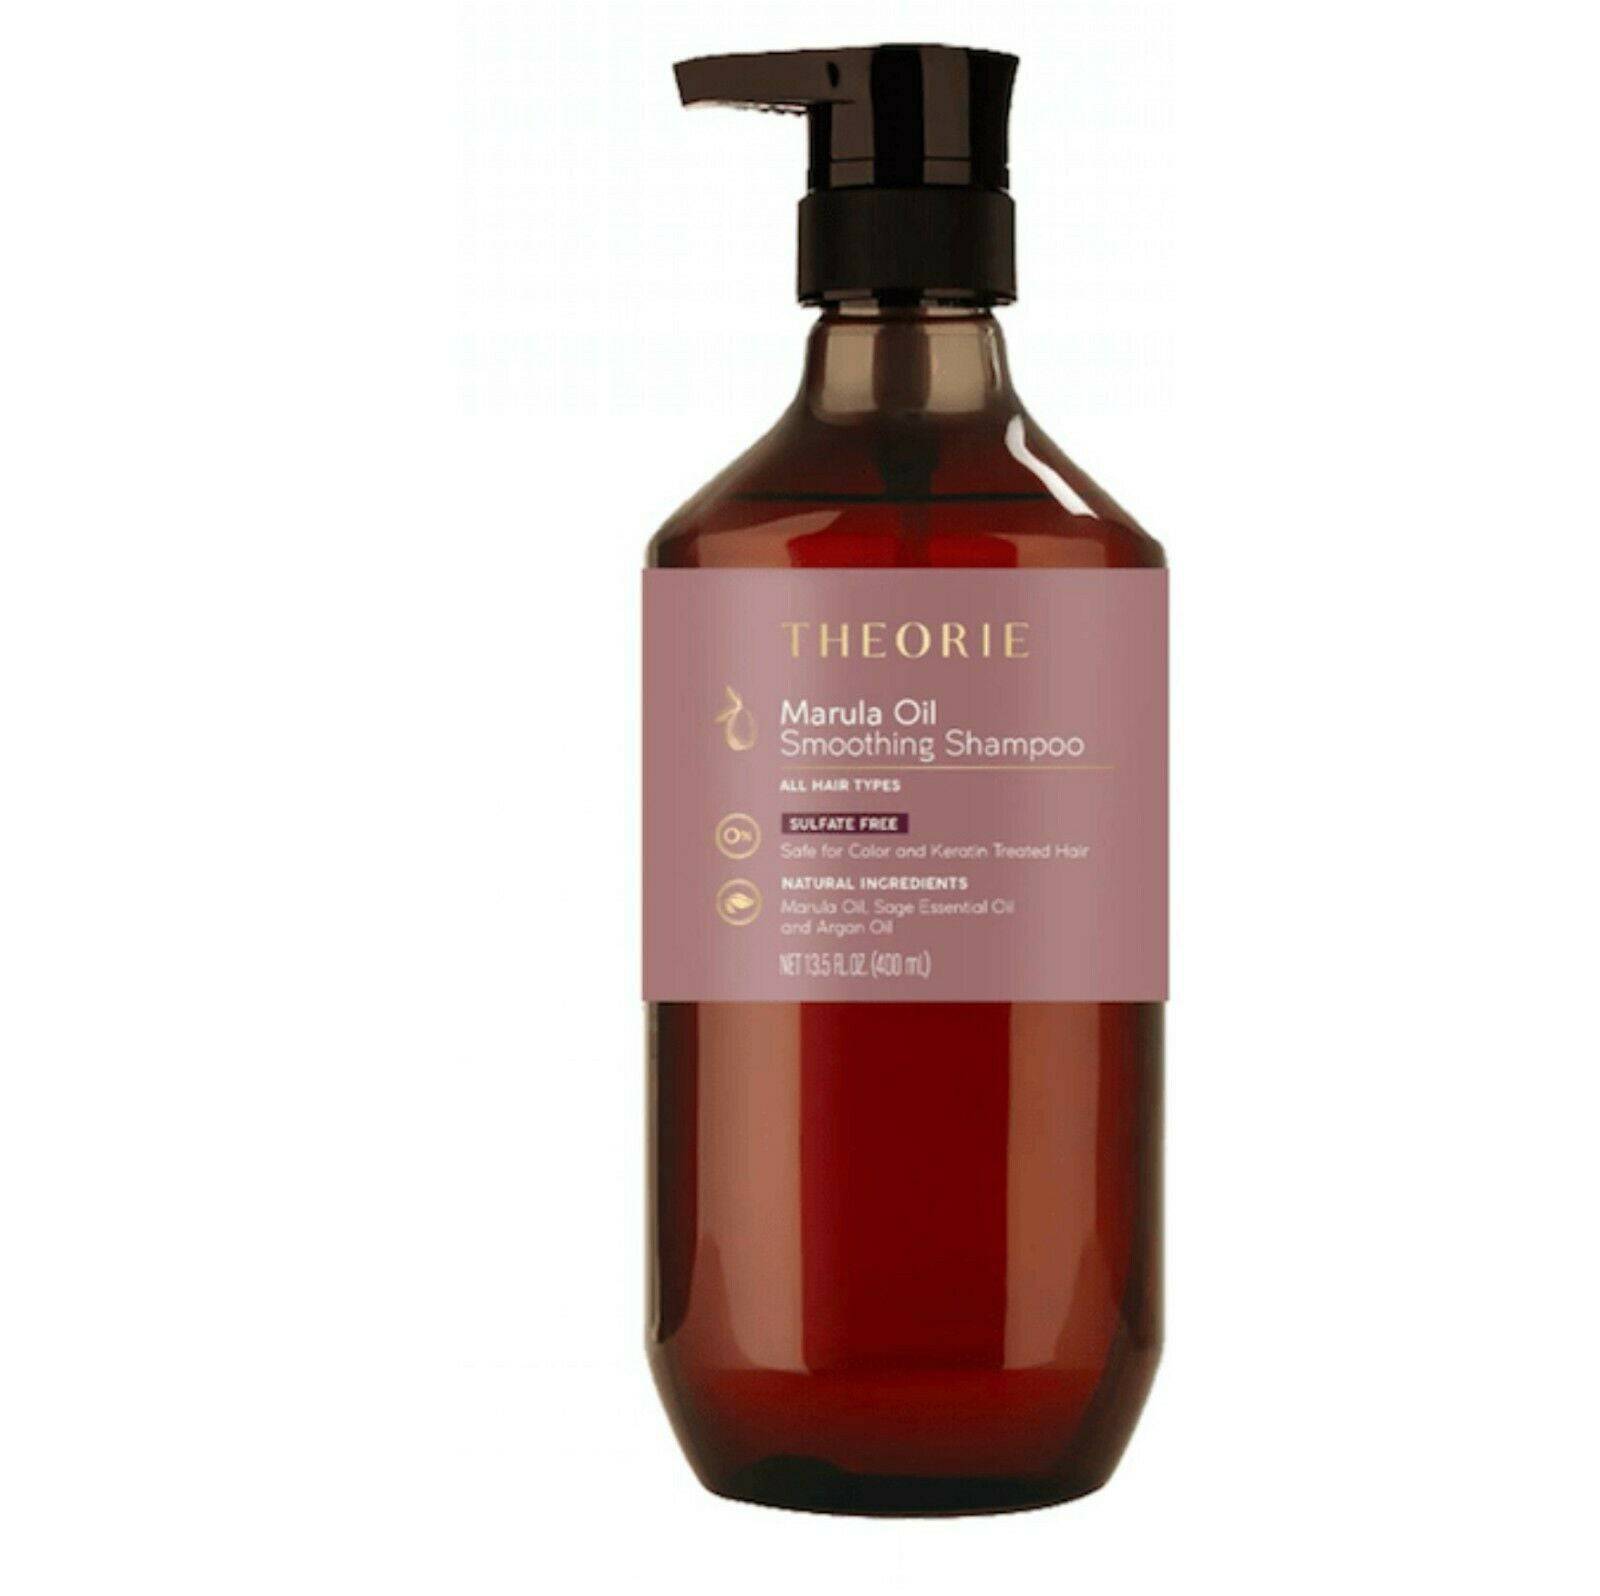 Theorie Marula Oil Smoothing Shampoo  Conditioner duo 400 ml each Sulfate Free - On Line Hair Depot